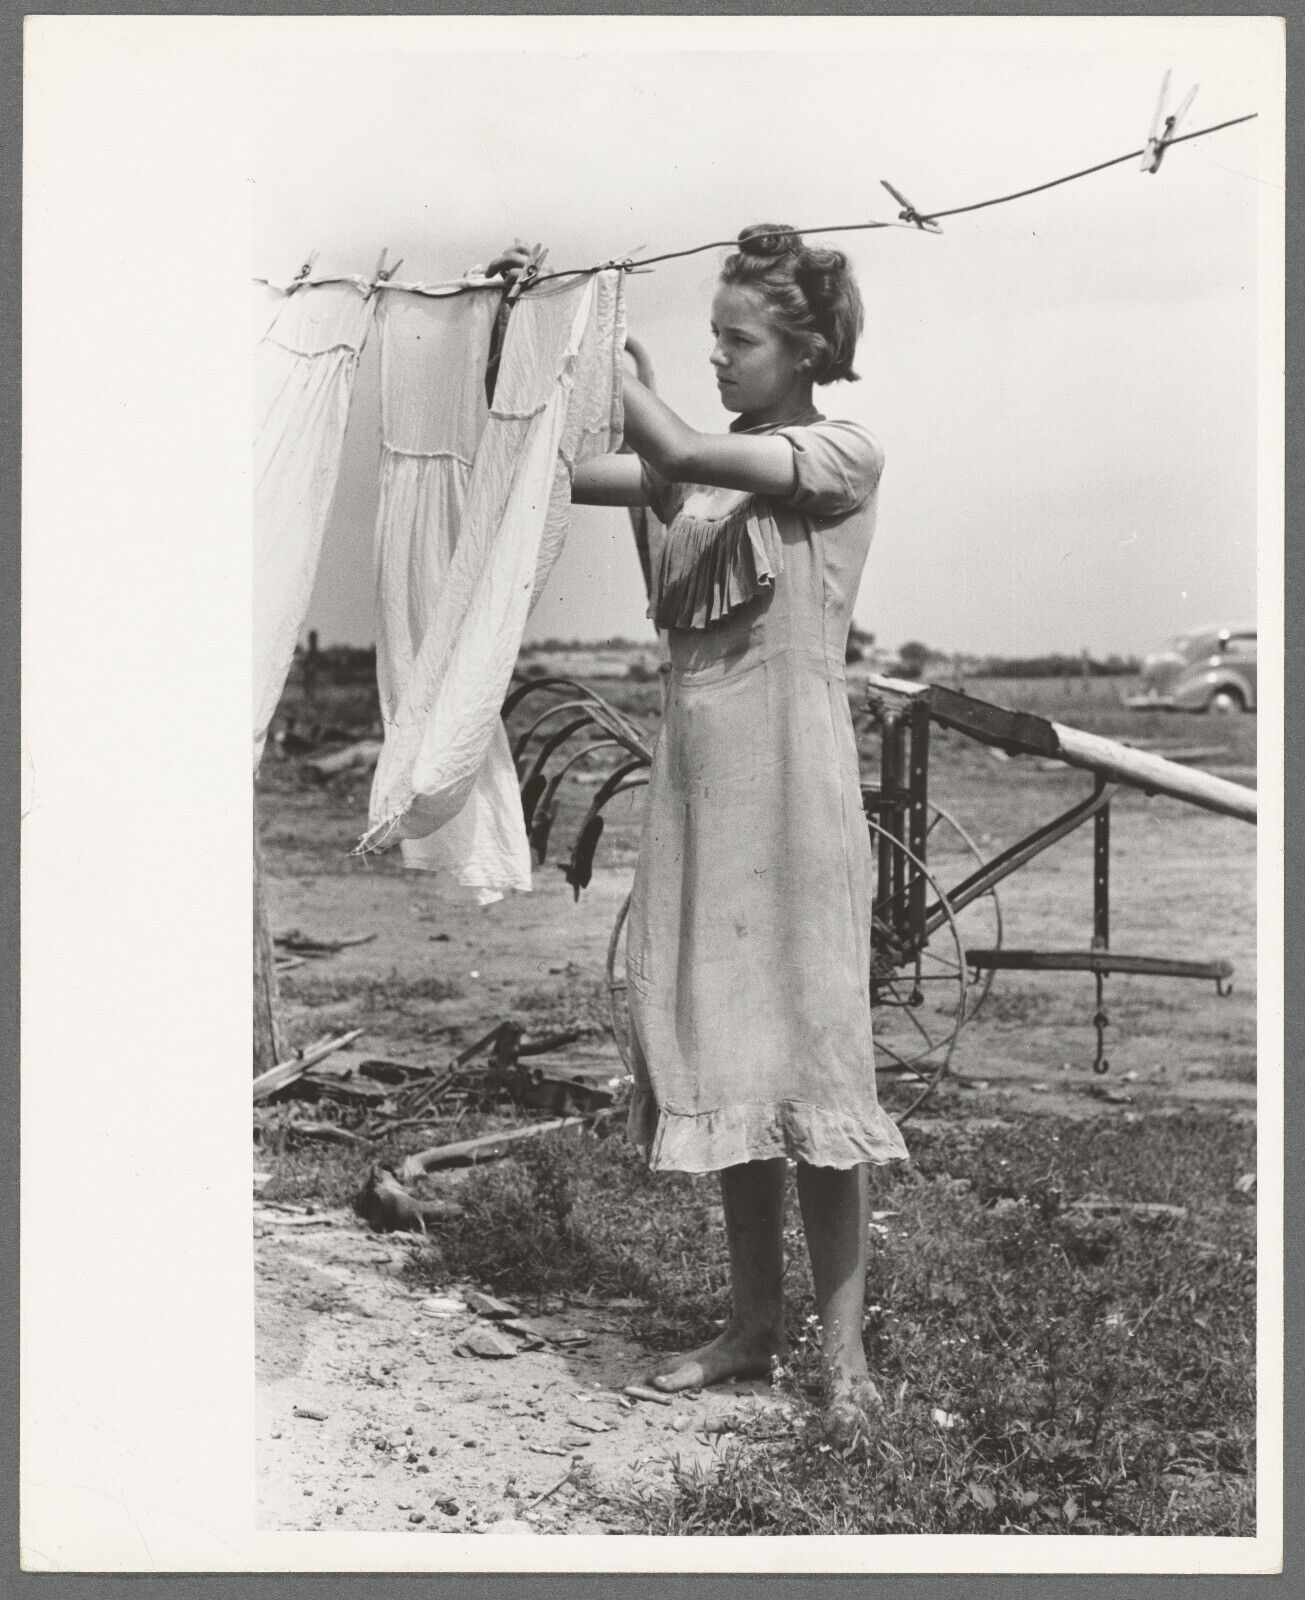 Old Photo, 1930's Hanging up clothes near Warner, Oklahoma 58025440